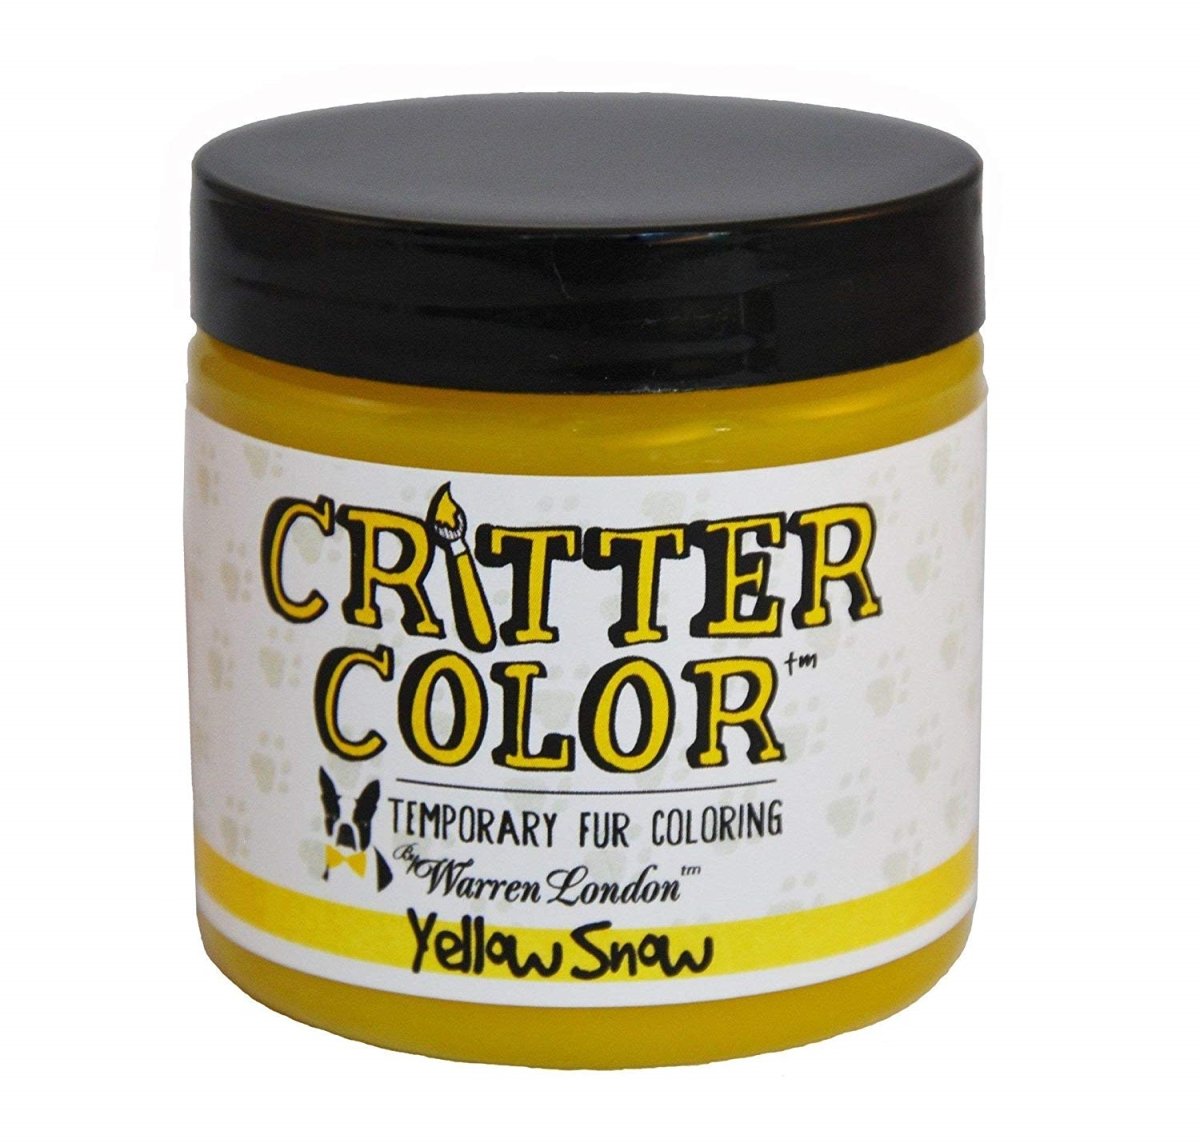 101807 Critter Color Temporary Fur Coloring For Dogs - Yellow Snow